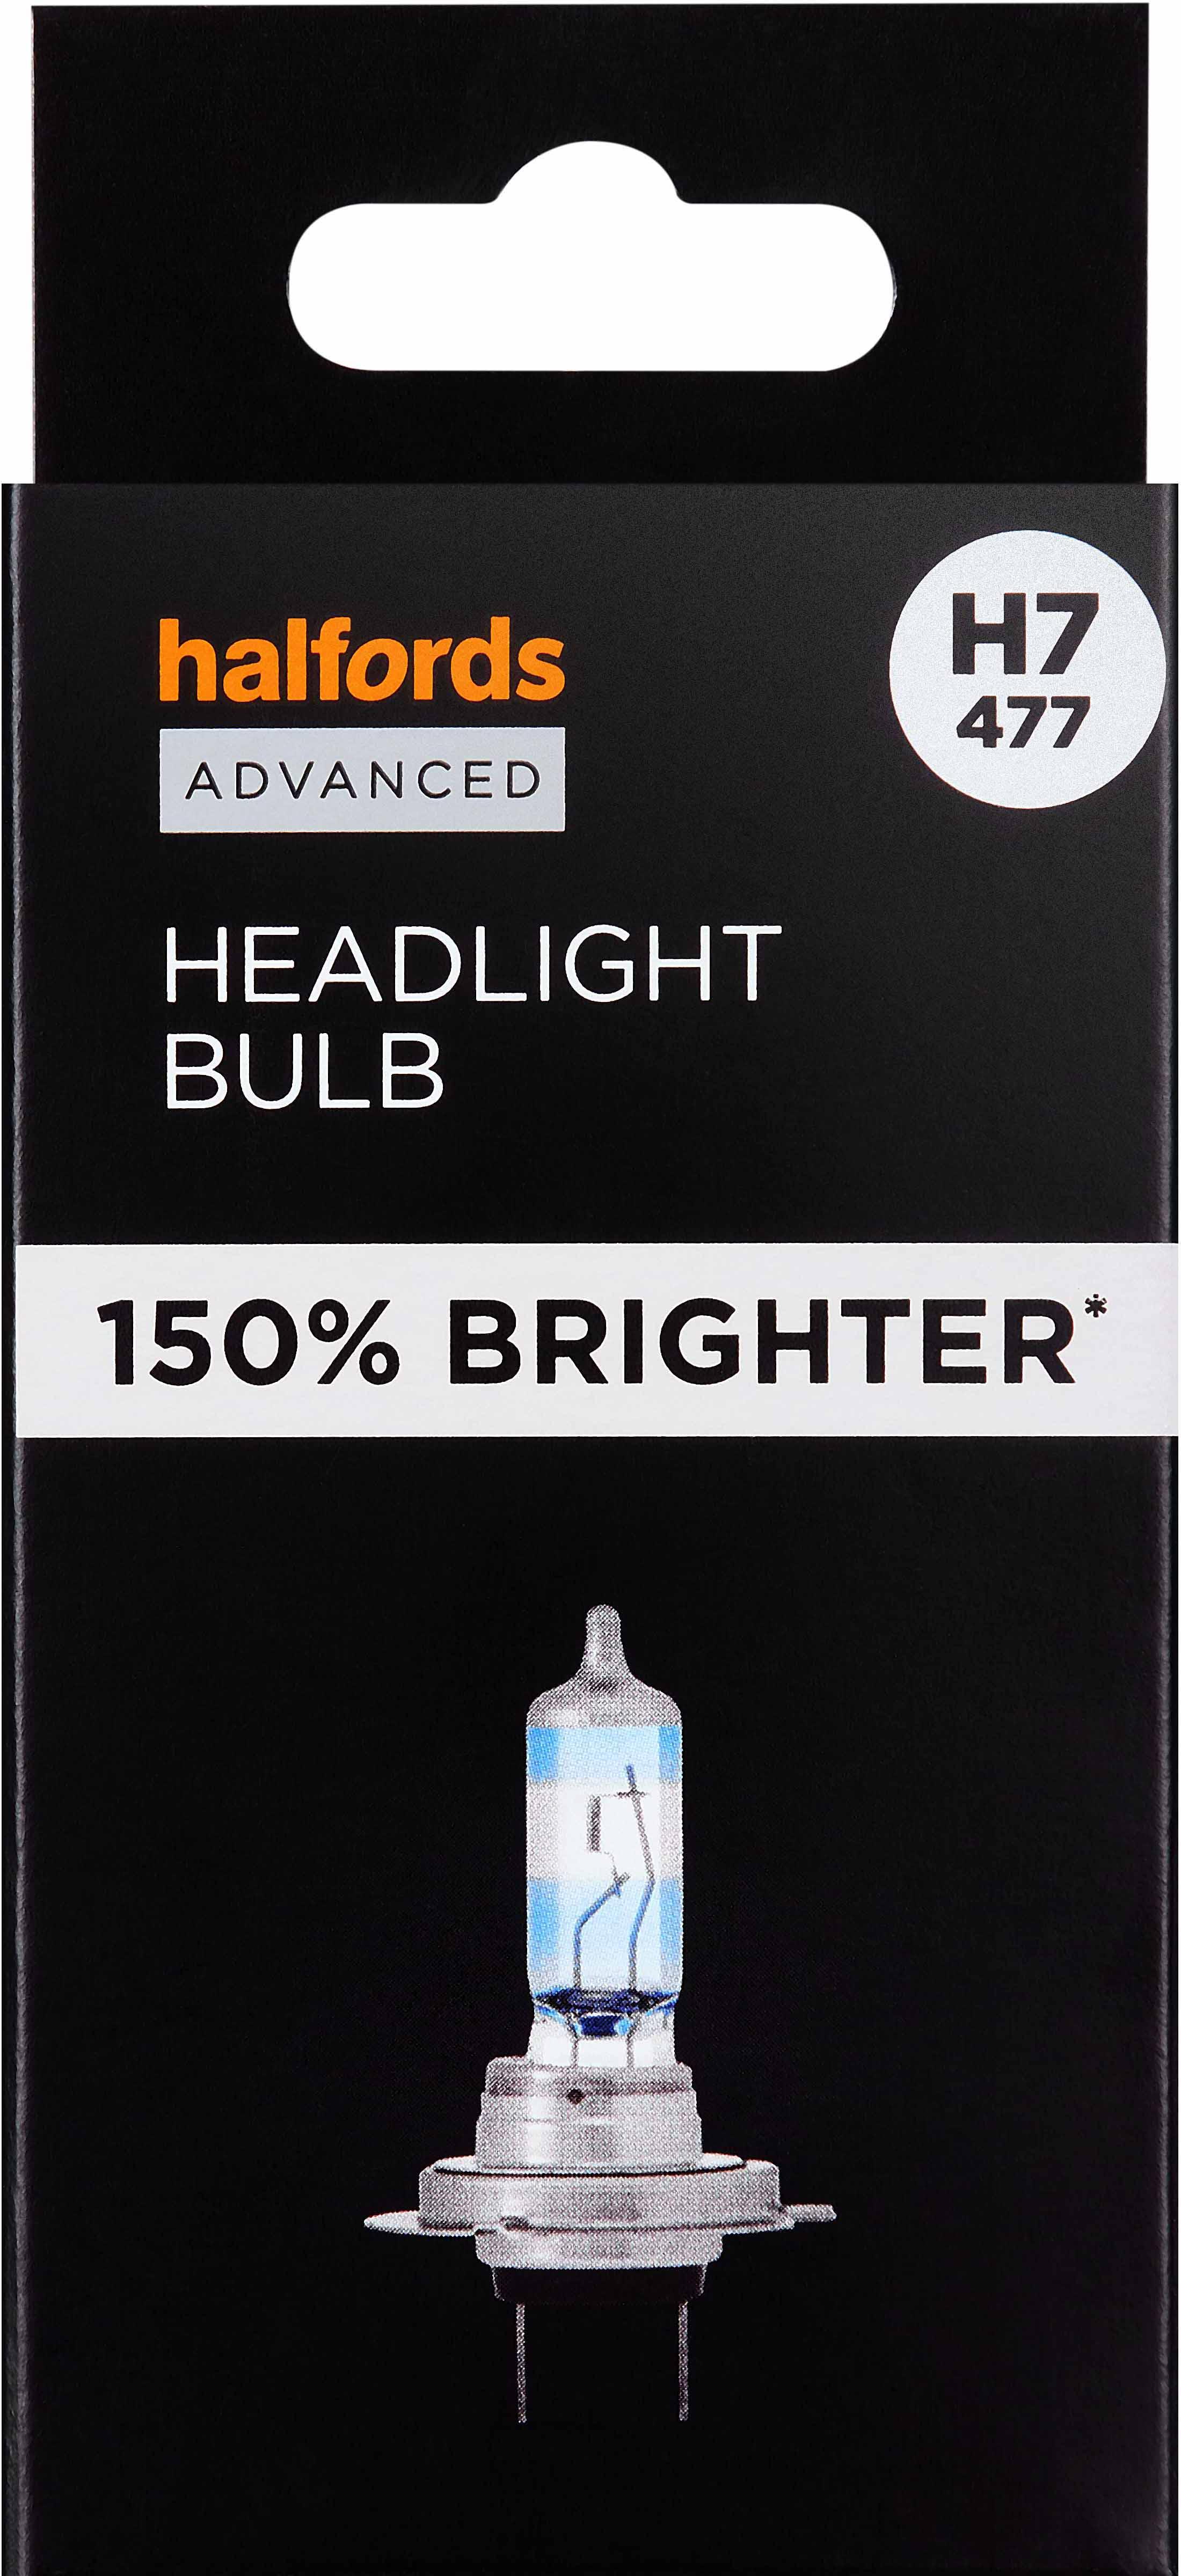 H7 477 Car Headlight Bulb Halfords Advanced Up To +150 Percent Brighter Single Pack